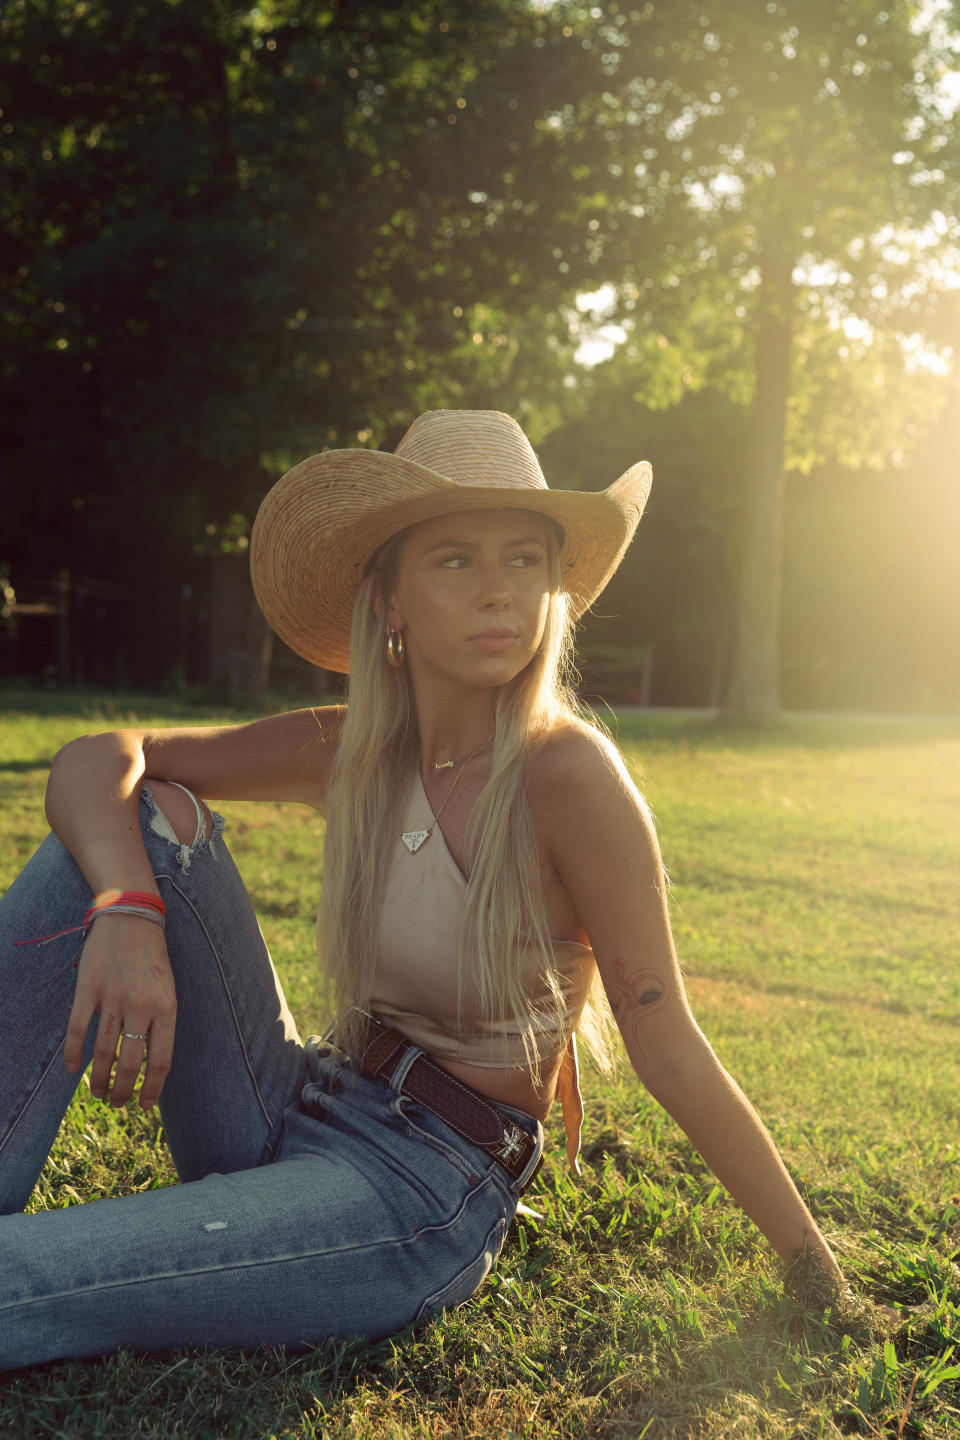 Hailey Welch of Belfast, Tennessee, has become known as the "Hawk Tuah" girl after a video she was in went viral. She now has signed with a management company, a public relations firm and an attorney to help her manage her viral fame.